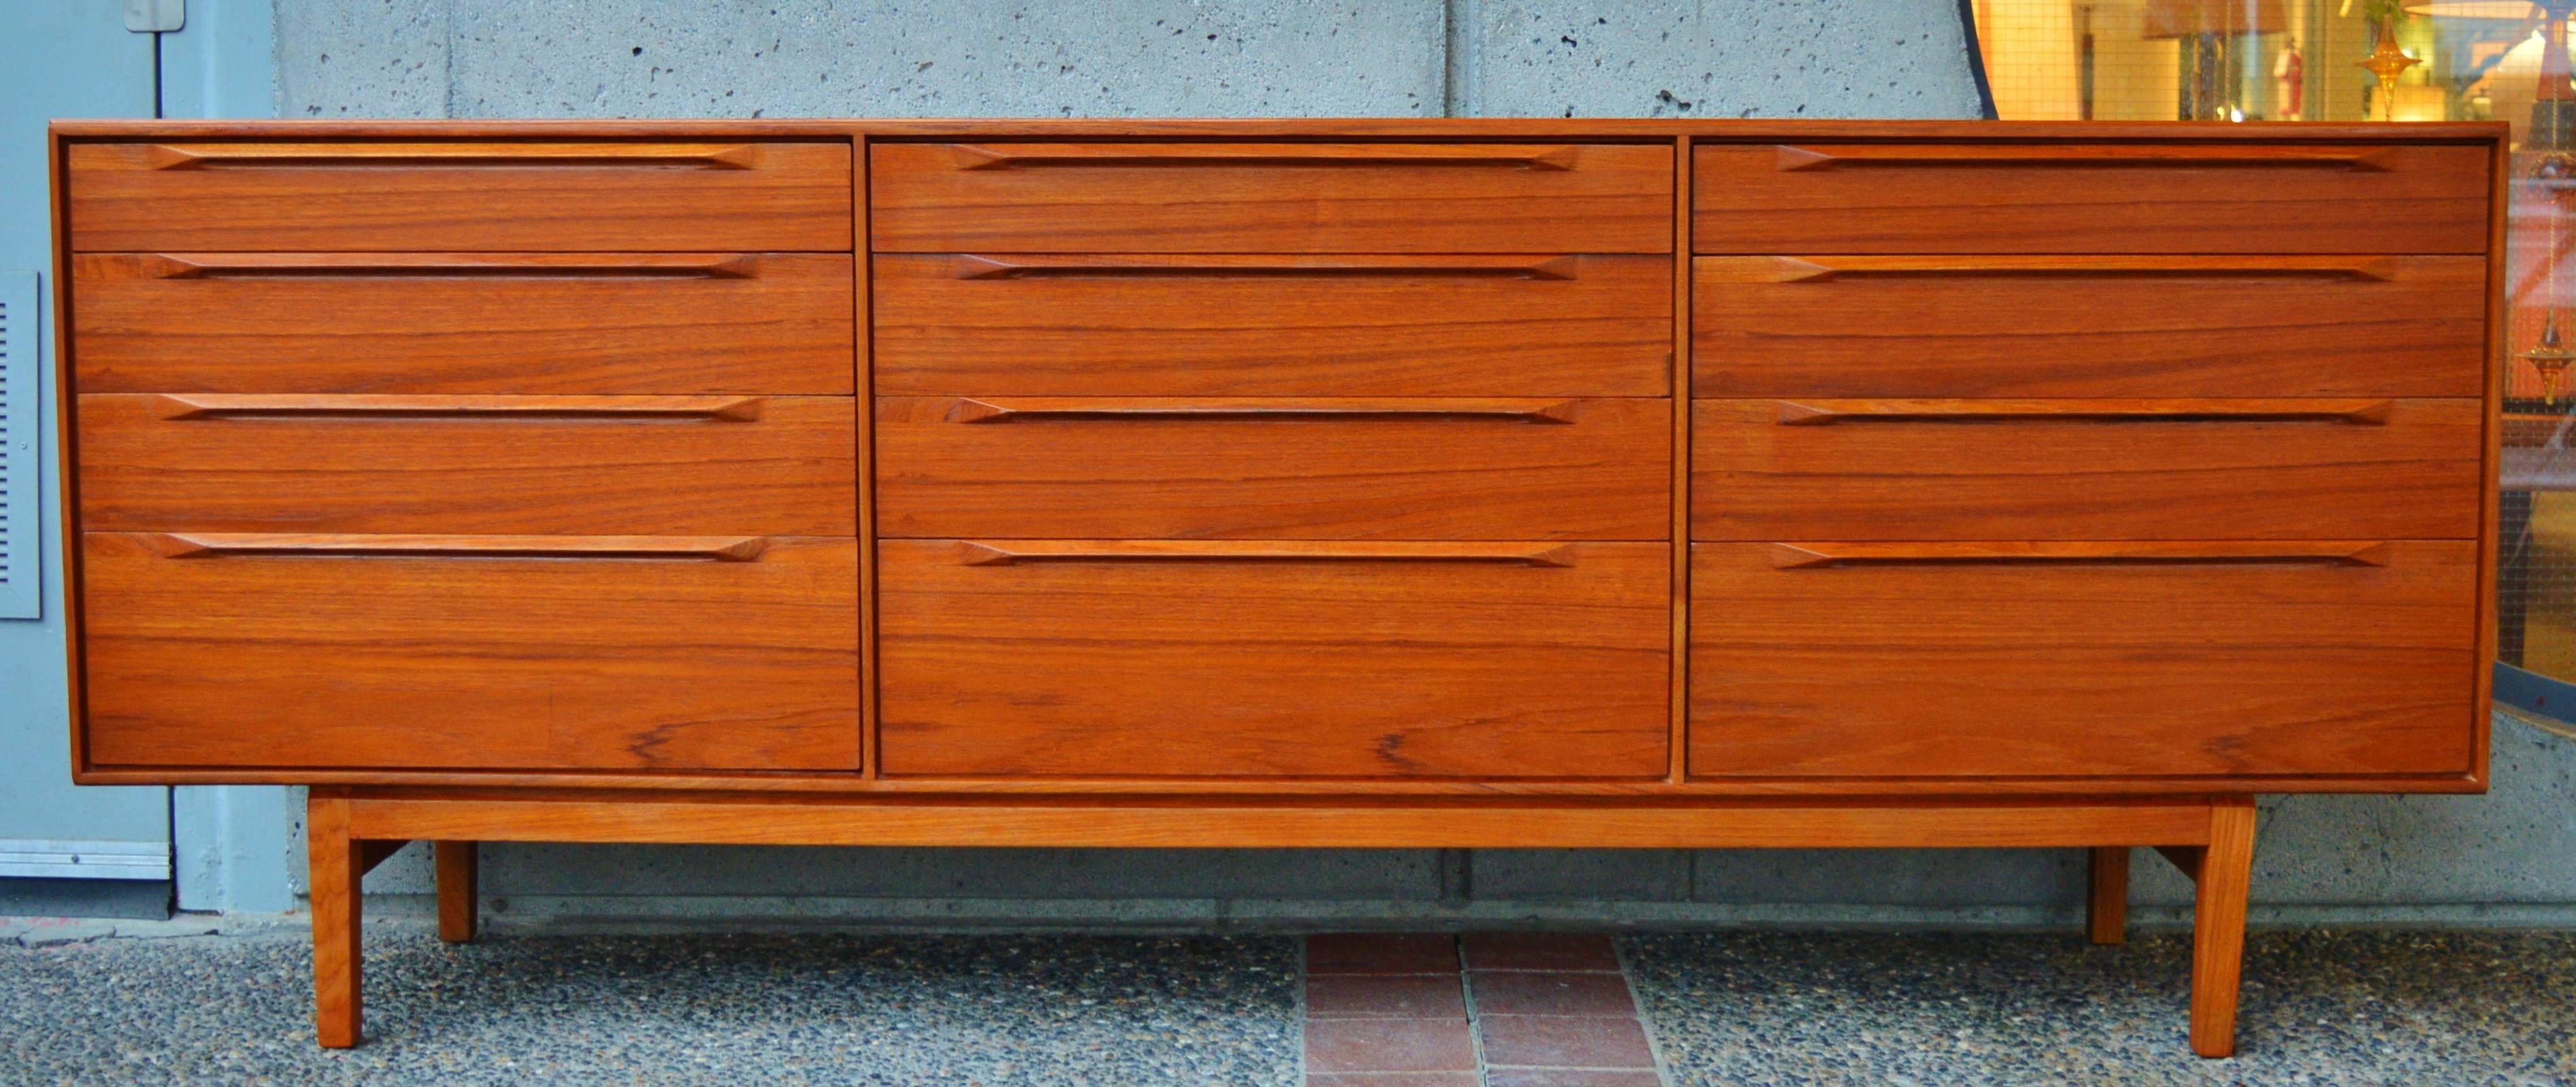 This exquisite Danish modern teak dresser is top quality, with all wood construction and impeccable detailing. Rare to see the 12 drawer version, the top drawers are slimmest, each with two dividers that are adjustable or removable - perfect for